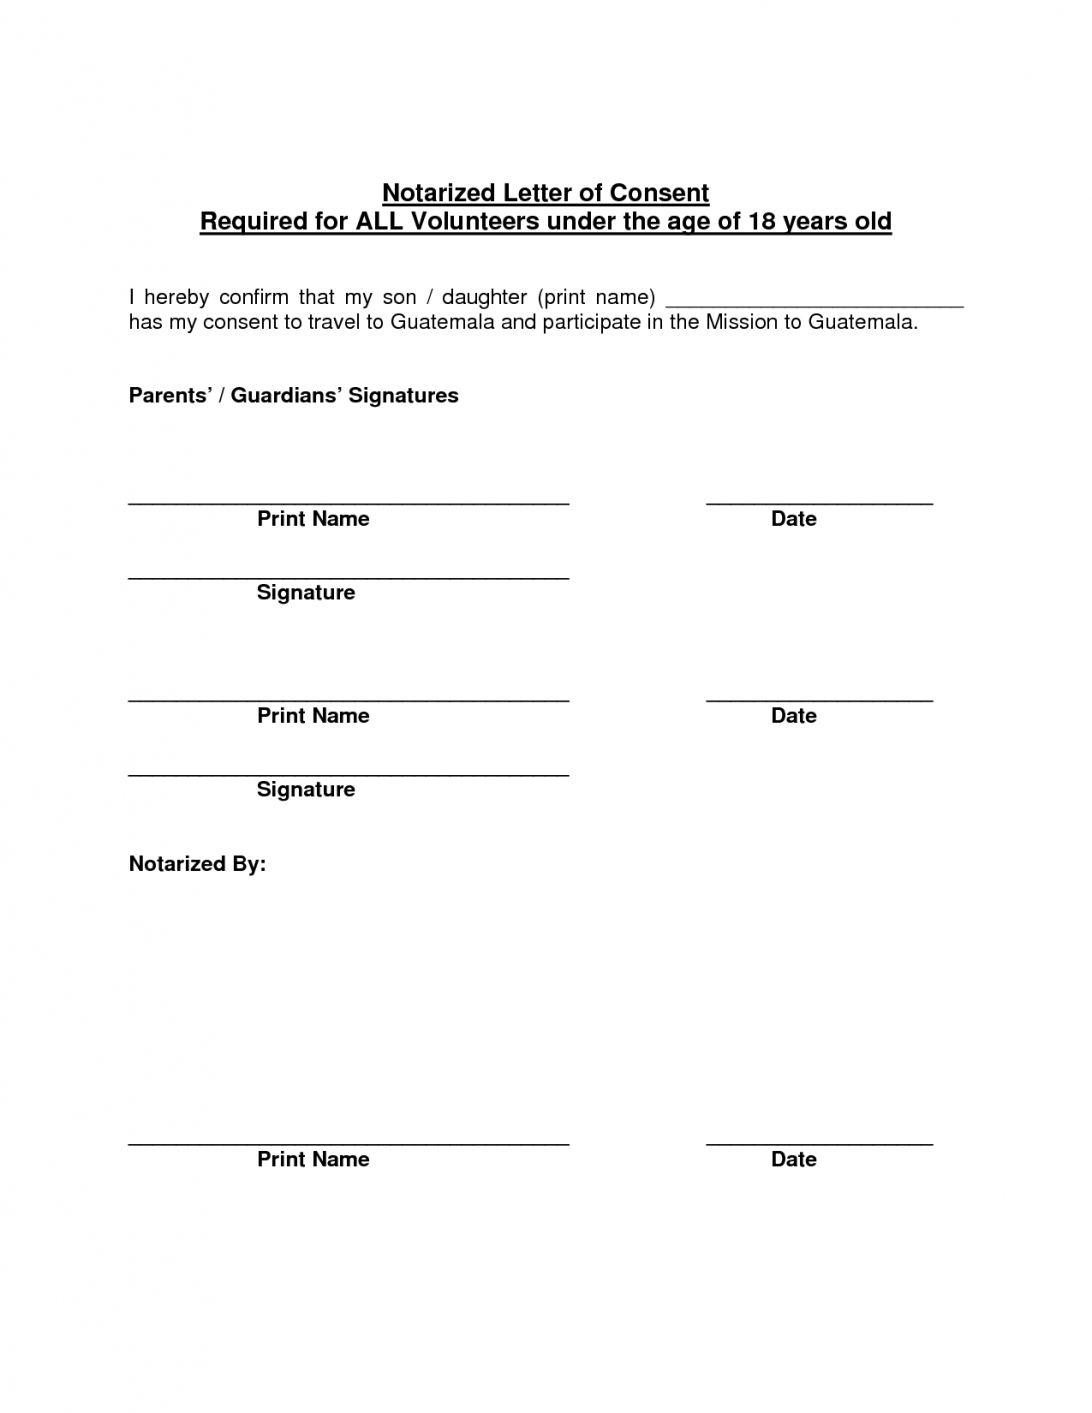 Legal Guardian Letter Examples 1 Letters Of General Regarding Notarized Letter Template For Child Travel